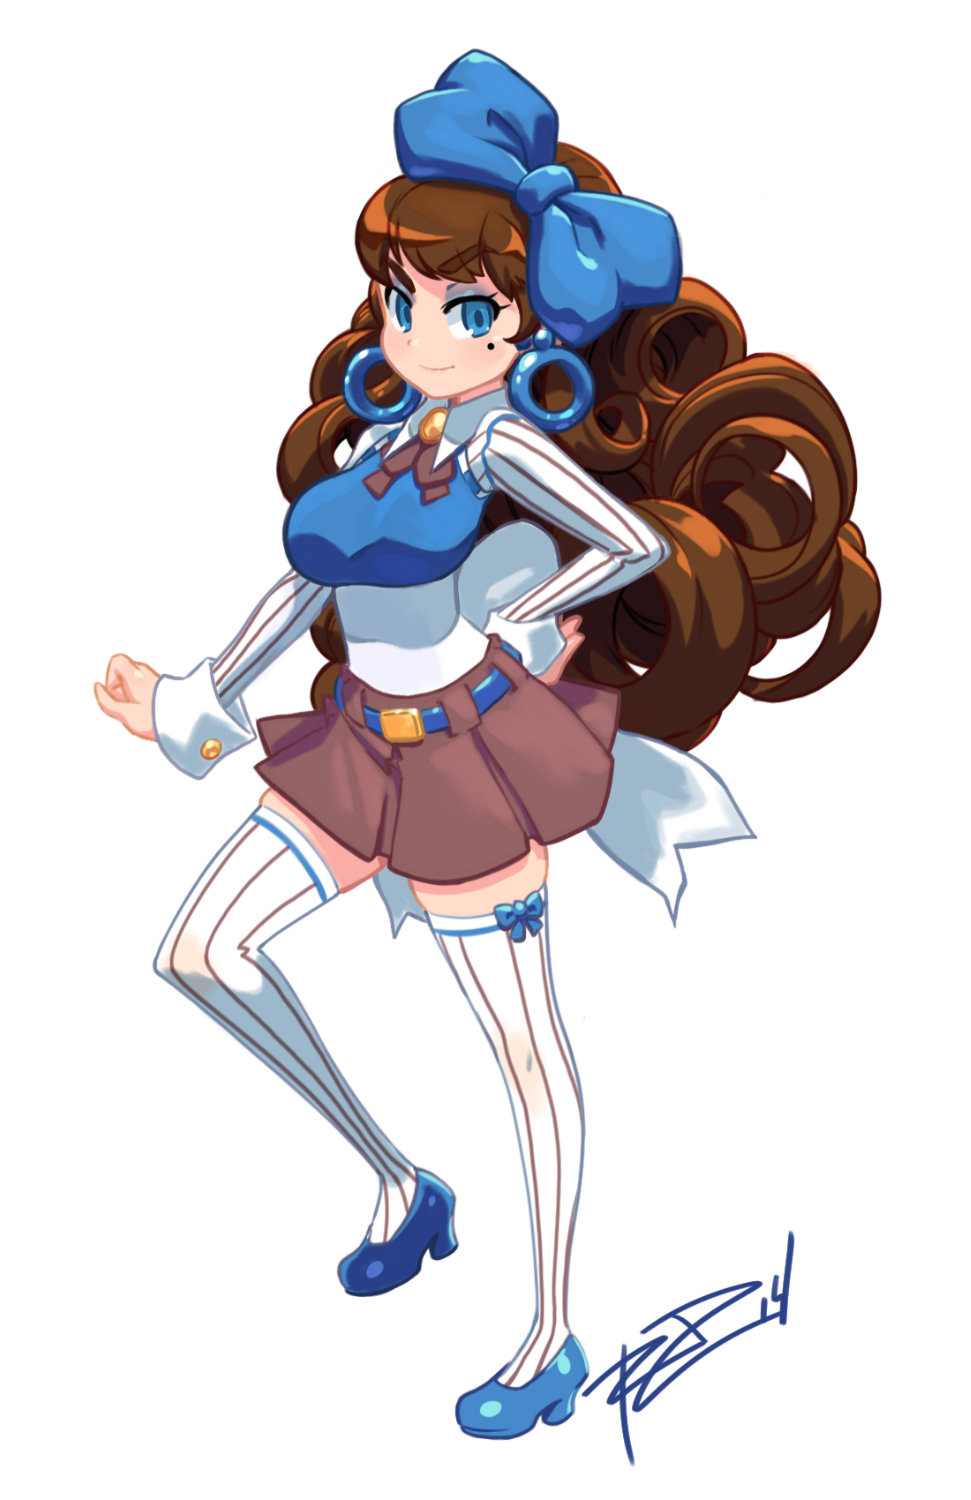 1girl bliss_barson blue_eyes bow breasts brown_hair cryamore curly_hair earrings eyeshadow full_body hair_bow hand_on_hip harada_takehito_(style) highres hoop_earrings jewelry long_hair makeup mole parody robert_porter skirt smile solo striped striped_legwear style_parody thigh-highs vertical-striped_legwear vertical_stripes white_legwear zettai_ryouiki